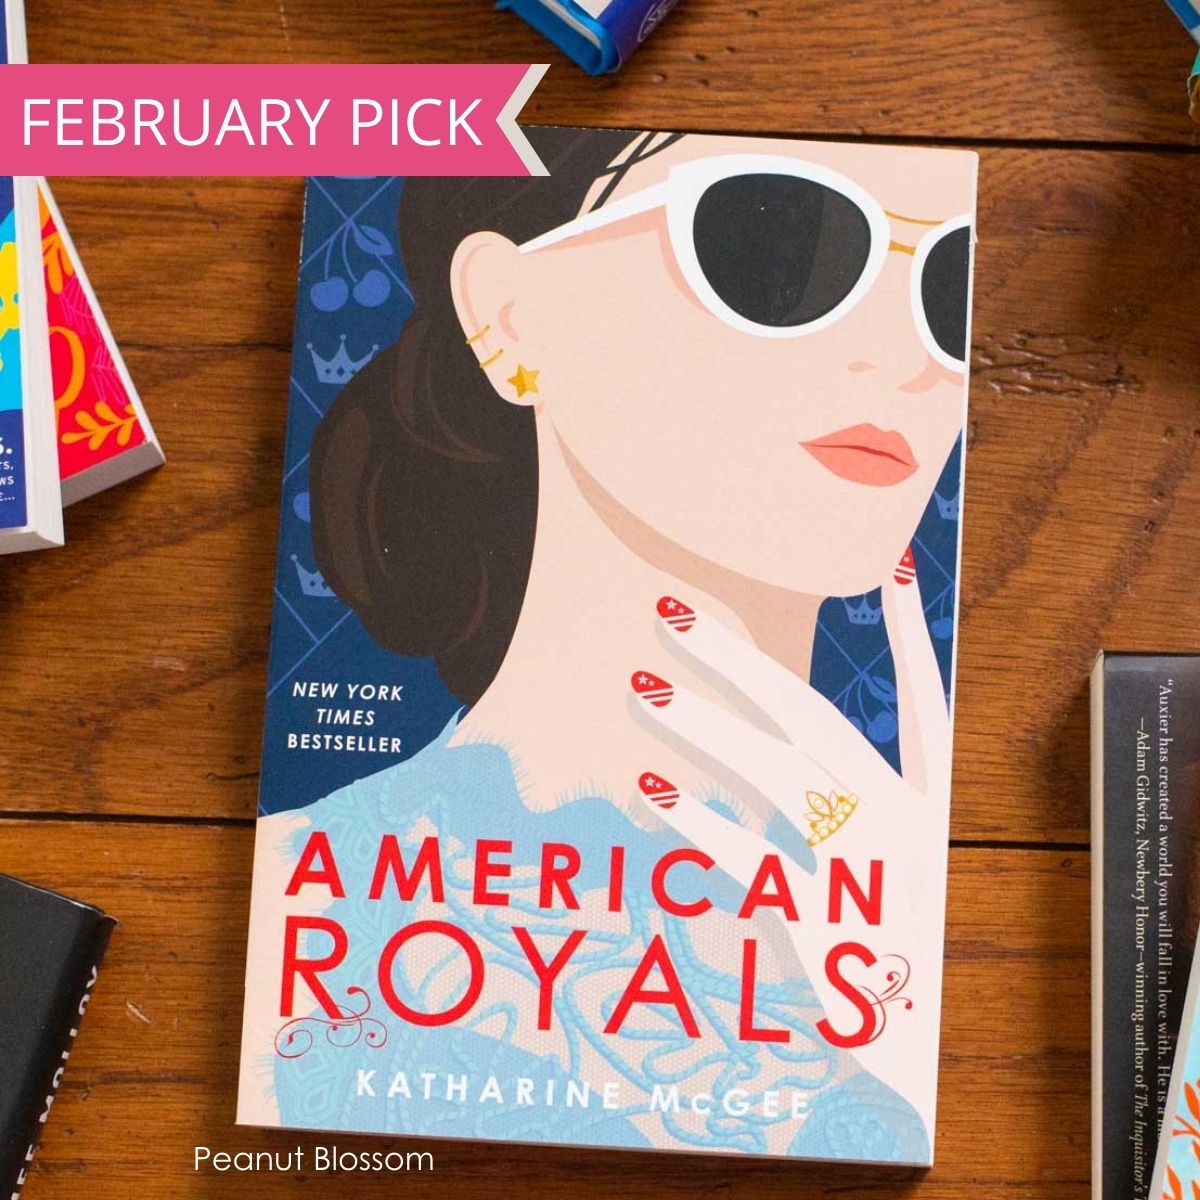 A copy of American Royals by Katharine McGee is the February pick.